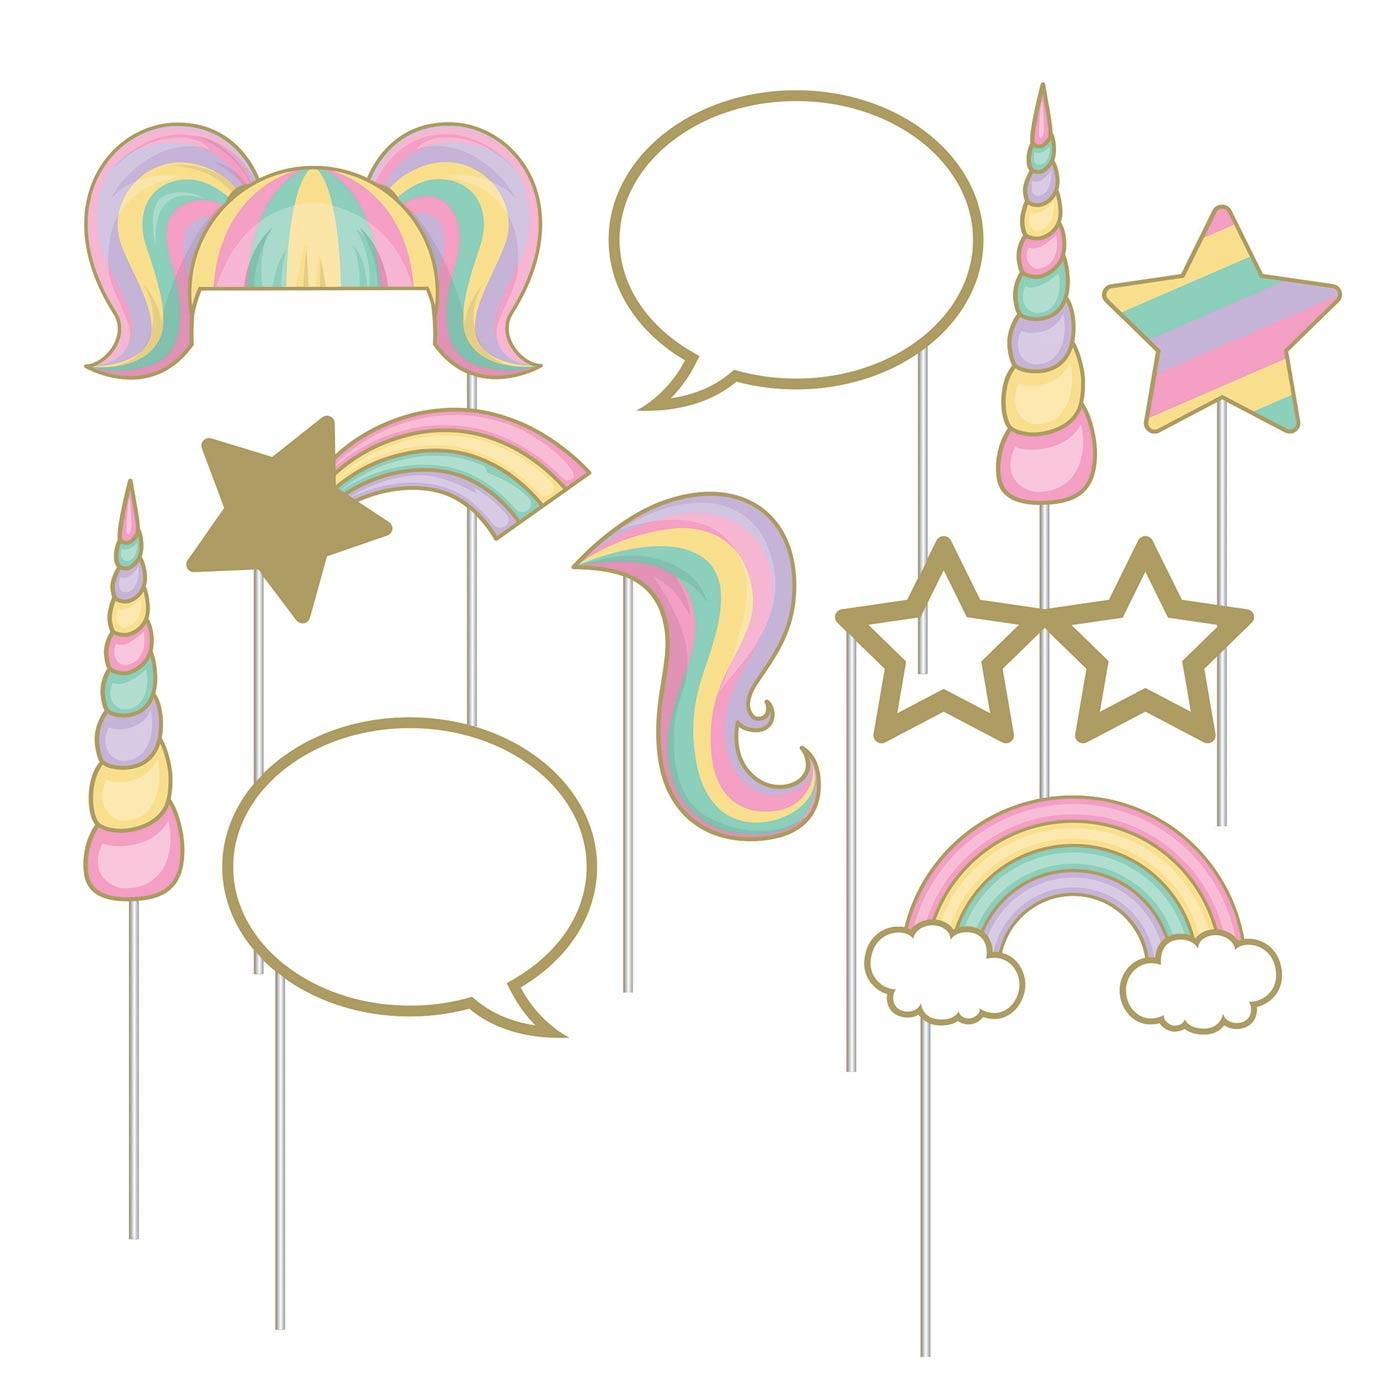 Unicorn Sparkle 10pc Photo Booth Props Kit by Creative Party 329308 available in the UK here at Karnival Costumes online party shop